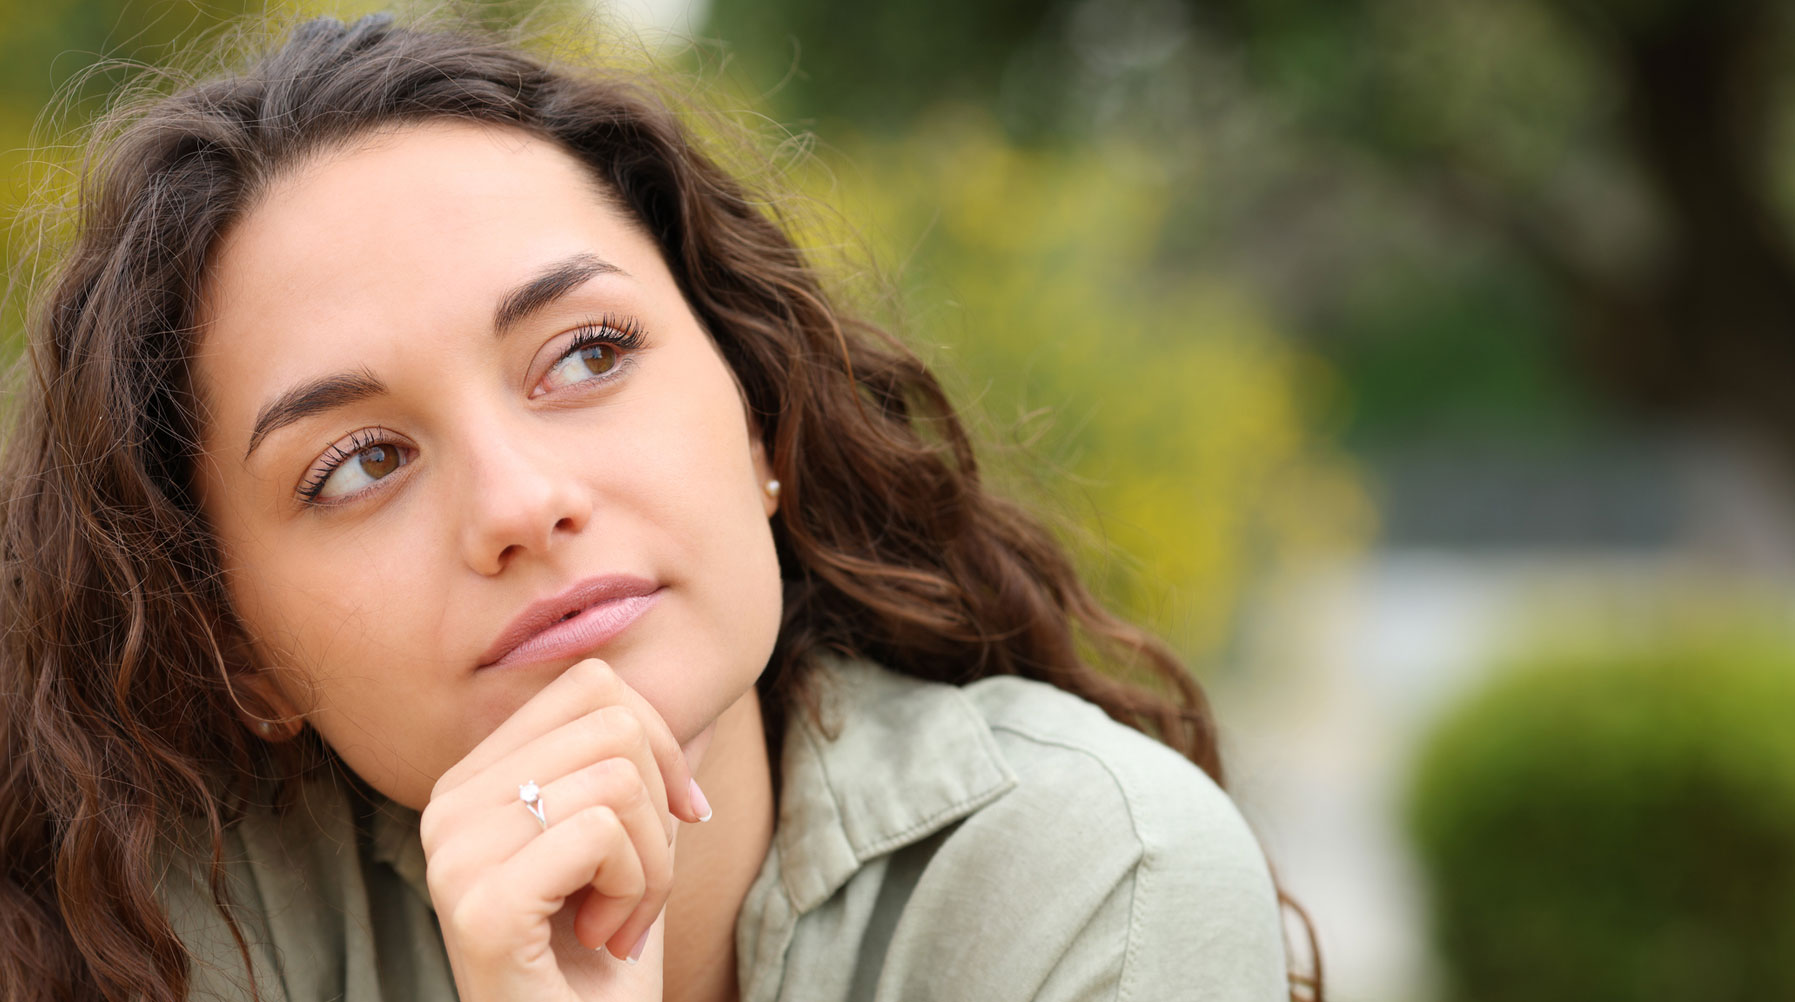 Woman concerned about Rh Factor compatibility